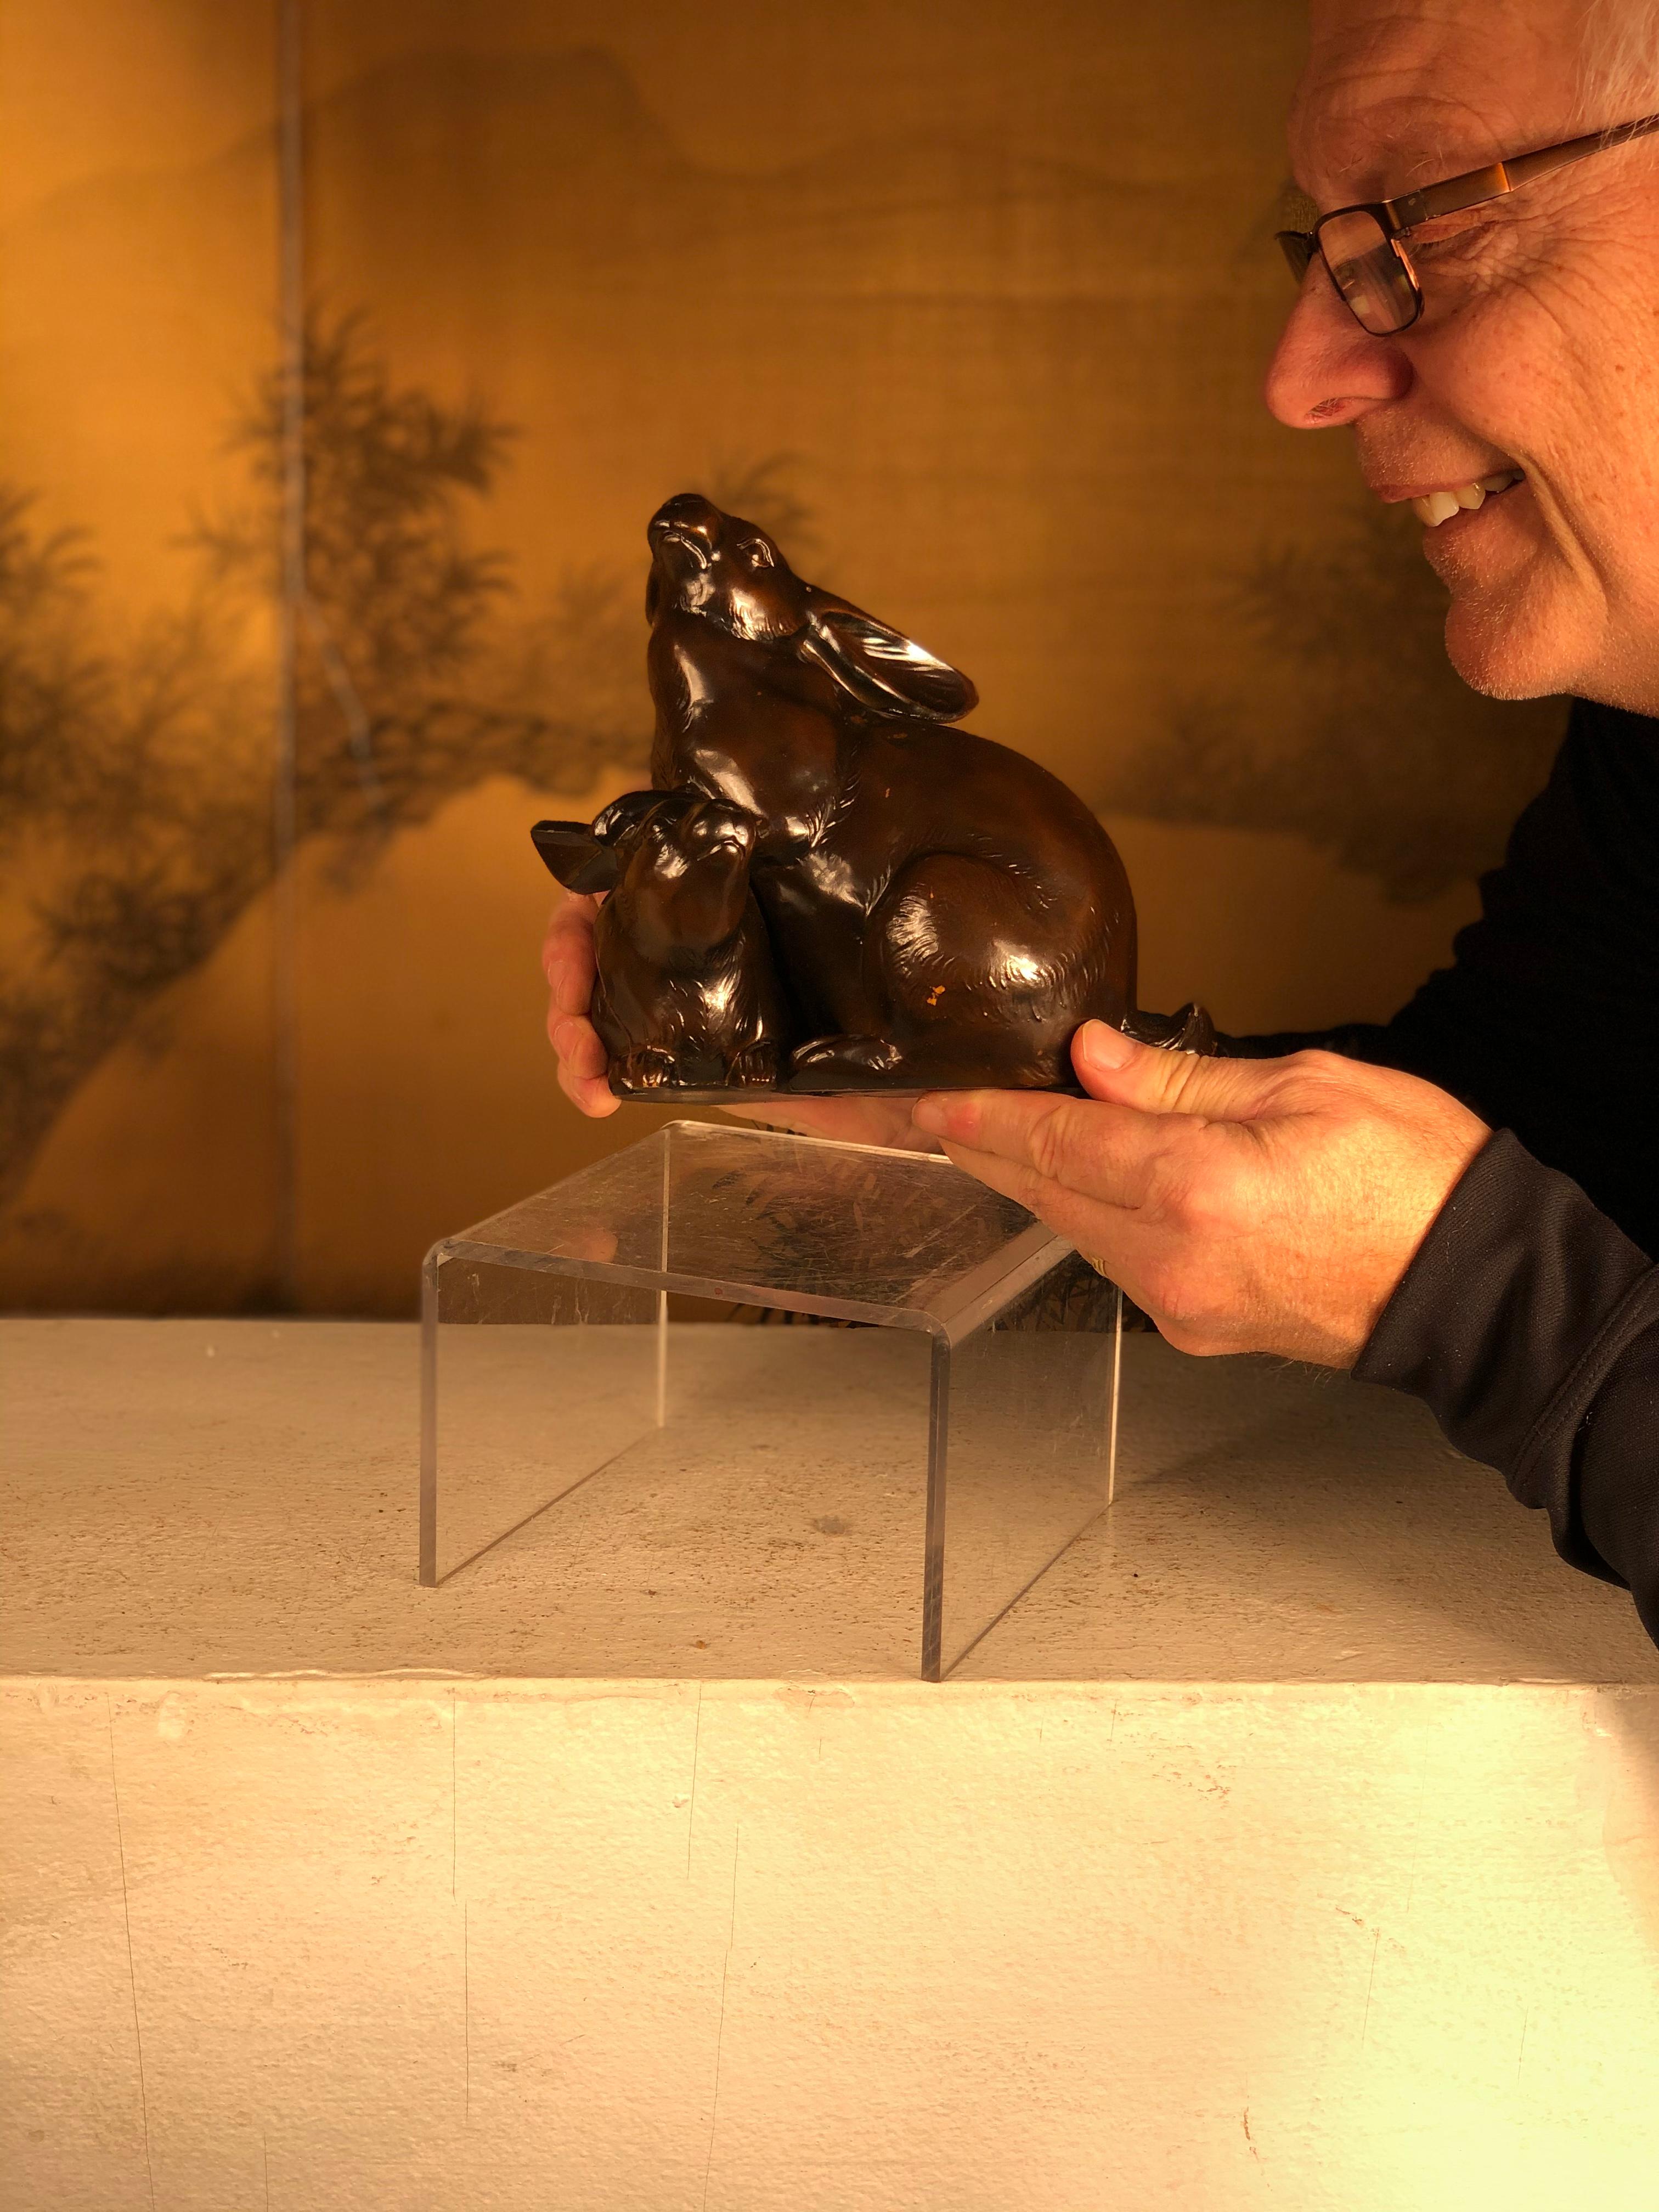 From our recent Japanese acquisition travels and coming from an important Japanese collector of rabbit usagi sculptures

A one-of-a-kind bronze rabbit family group with fine details, a mother and baby rabbit. .

Signed. 

This is a remarkable